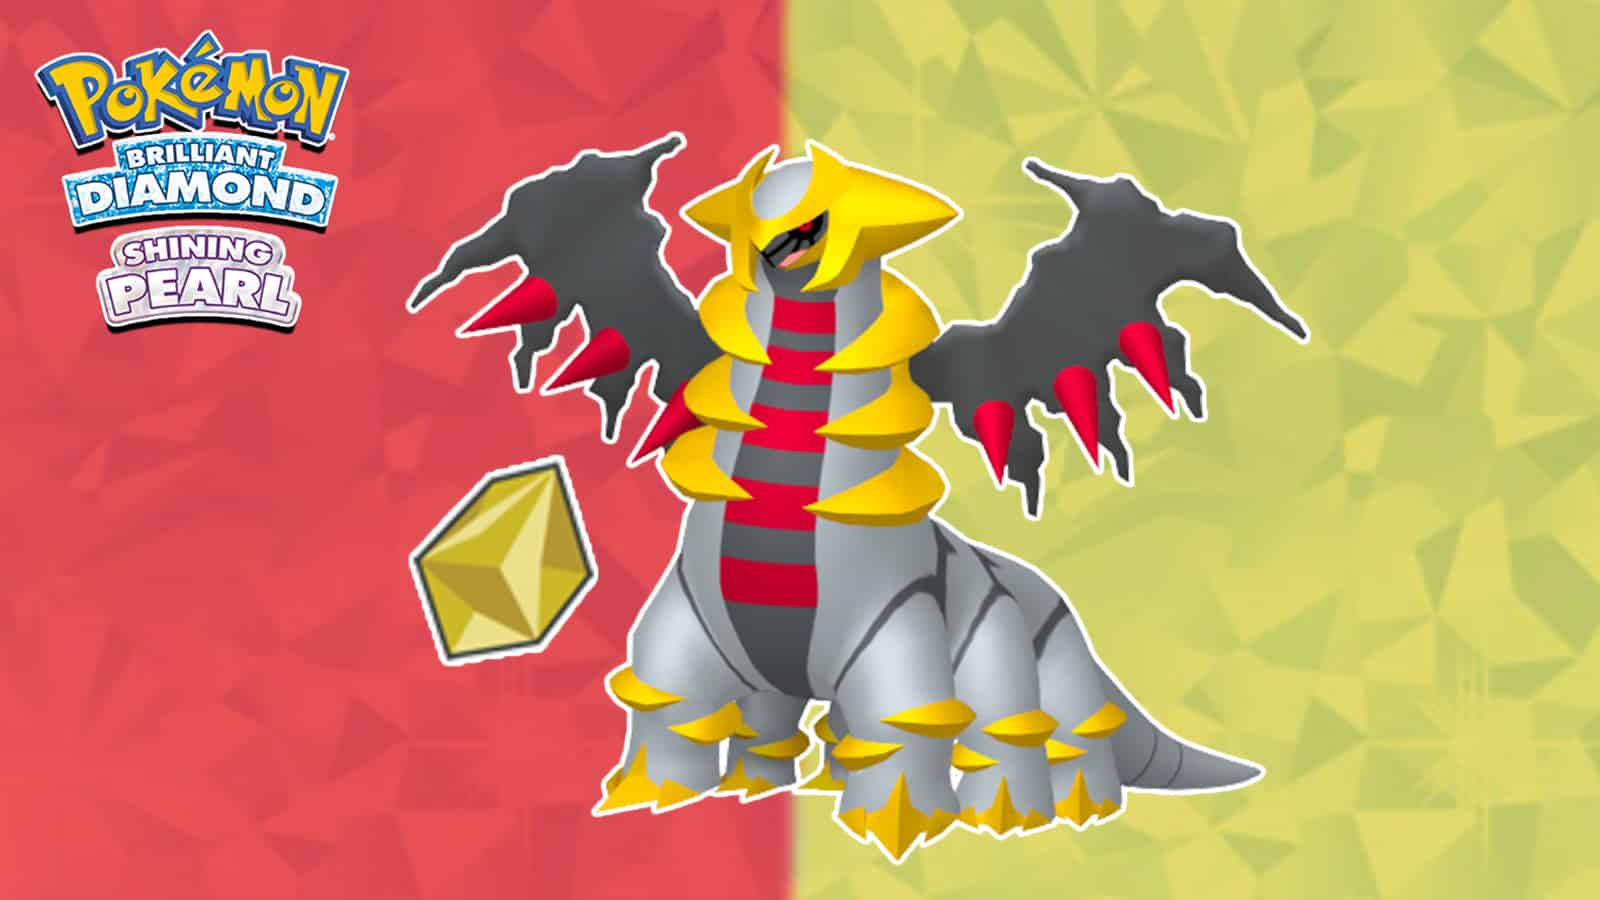 Pokemon Legends Arceus guide: How to catch Giratina, change formes